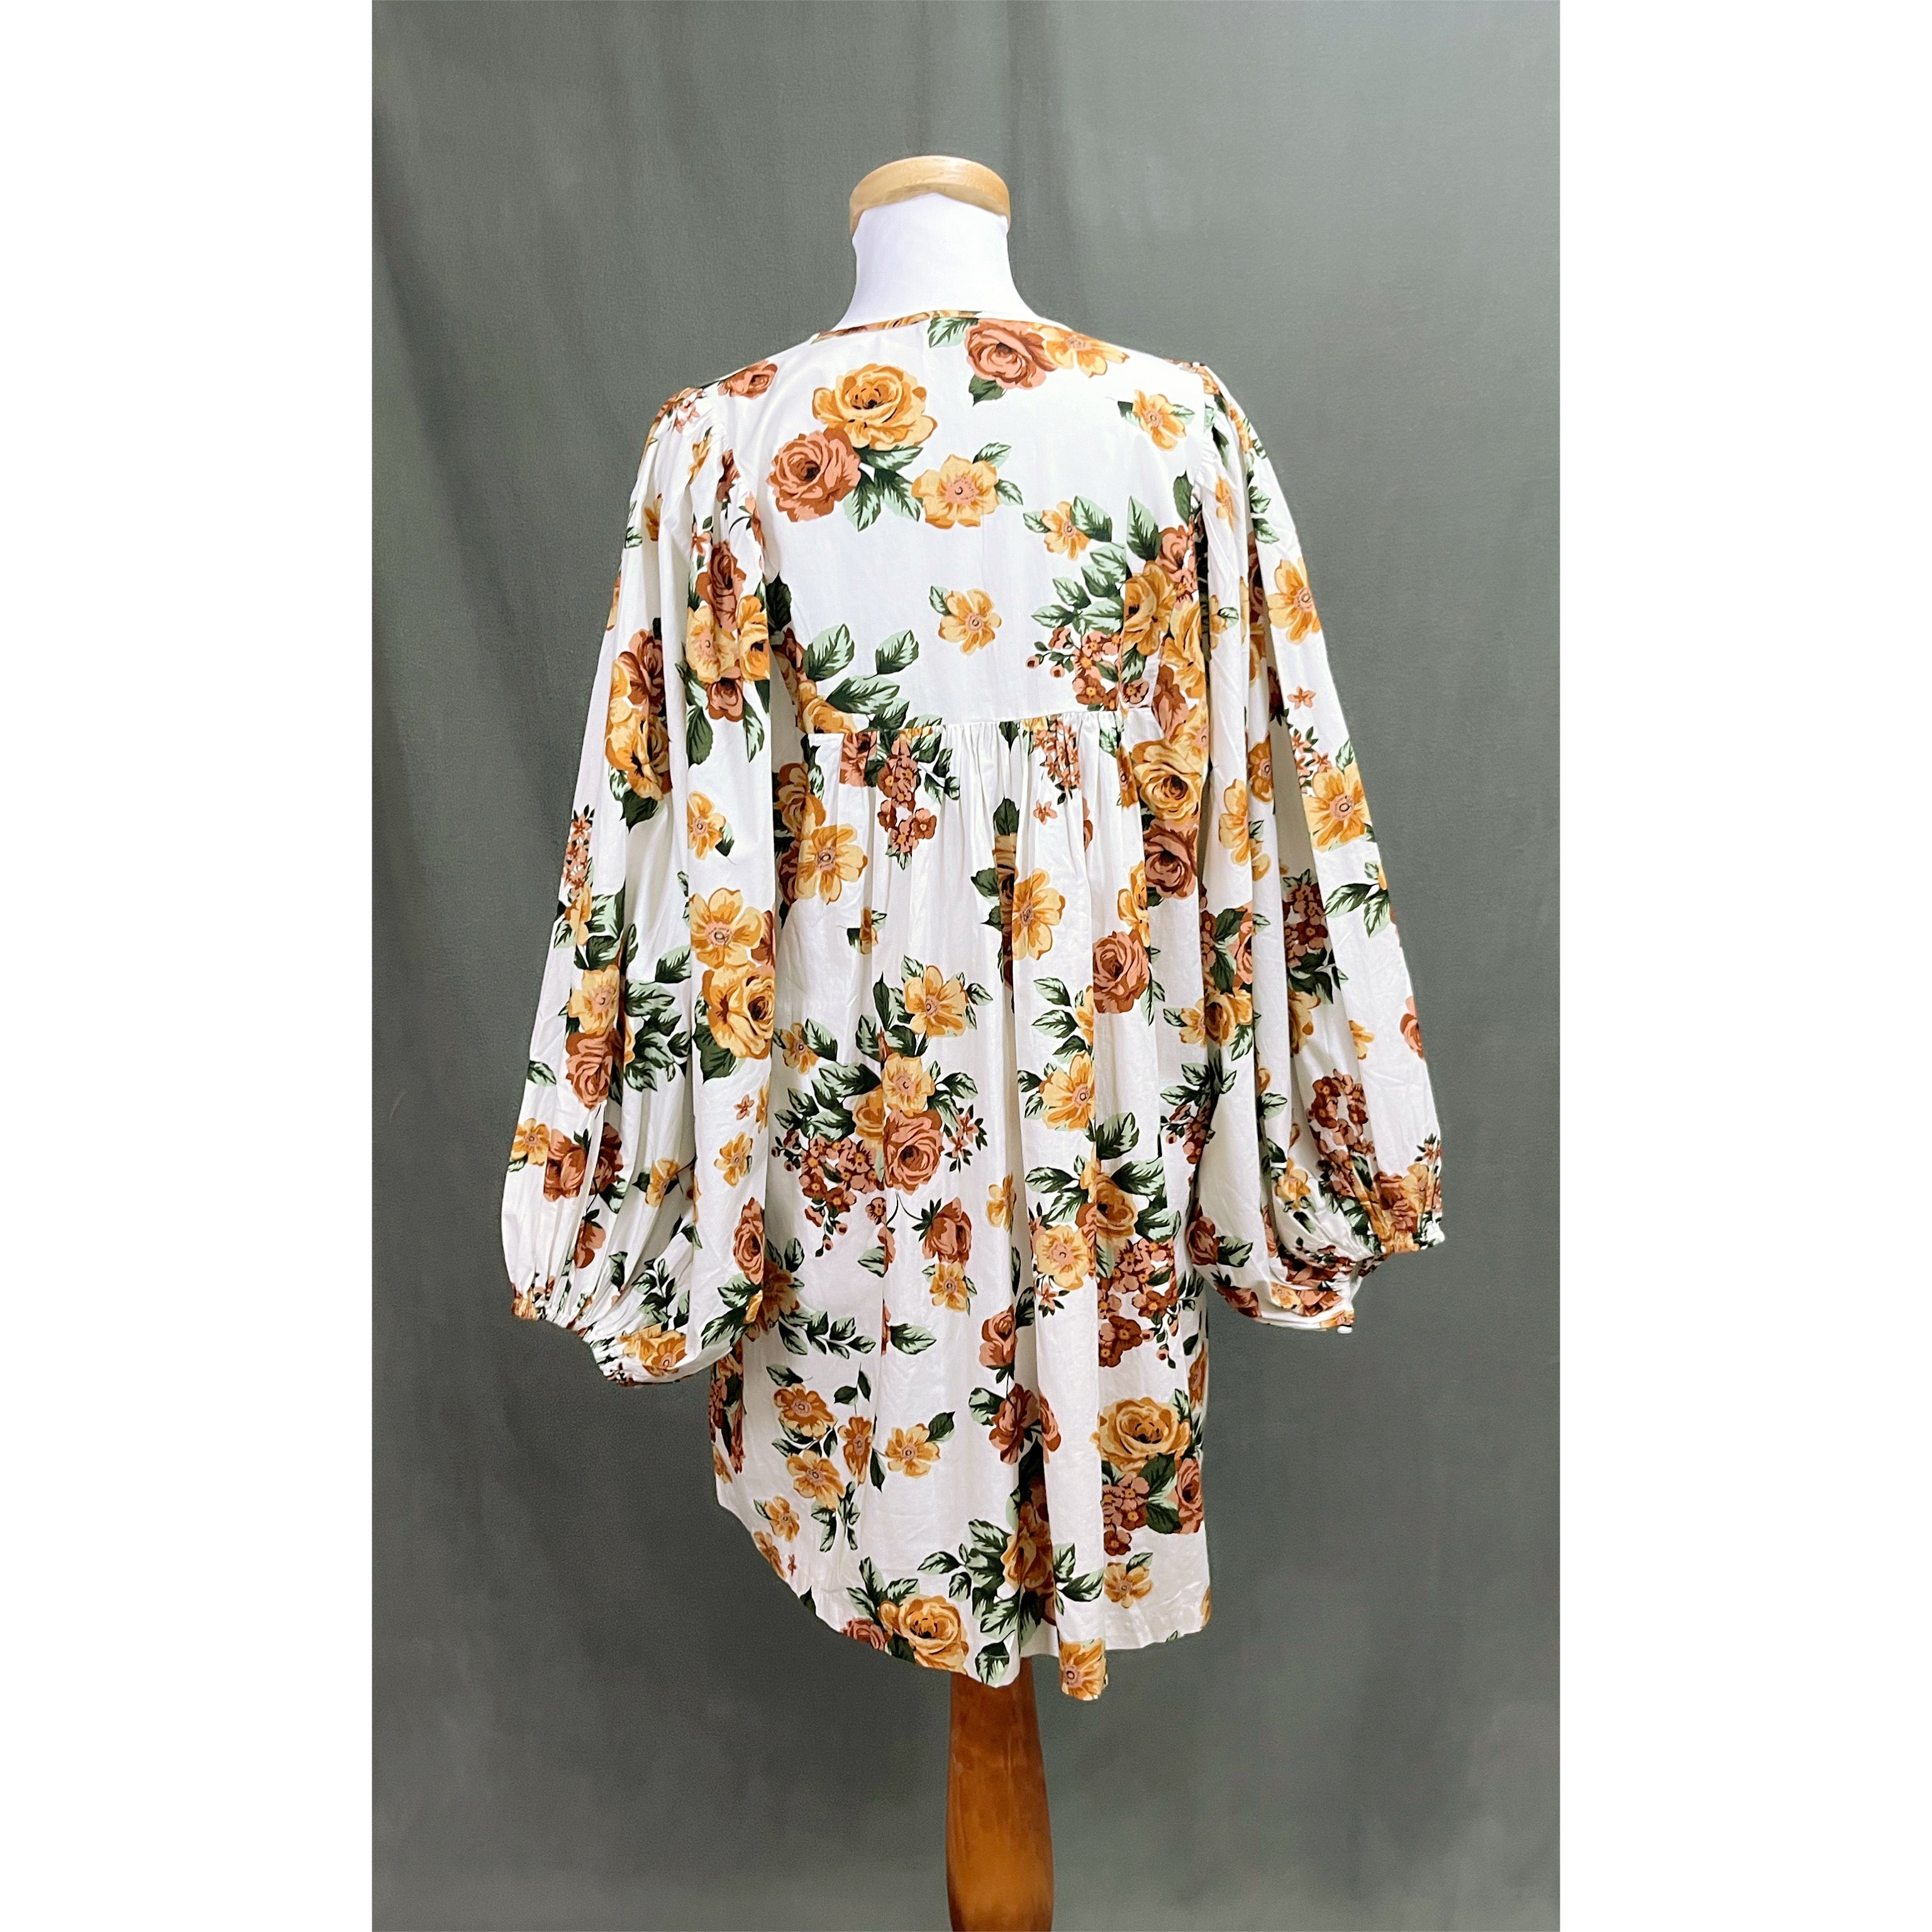 Mille puff sleeve floral dress, size L